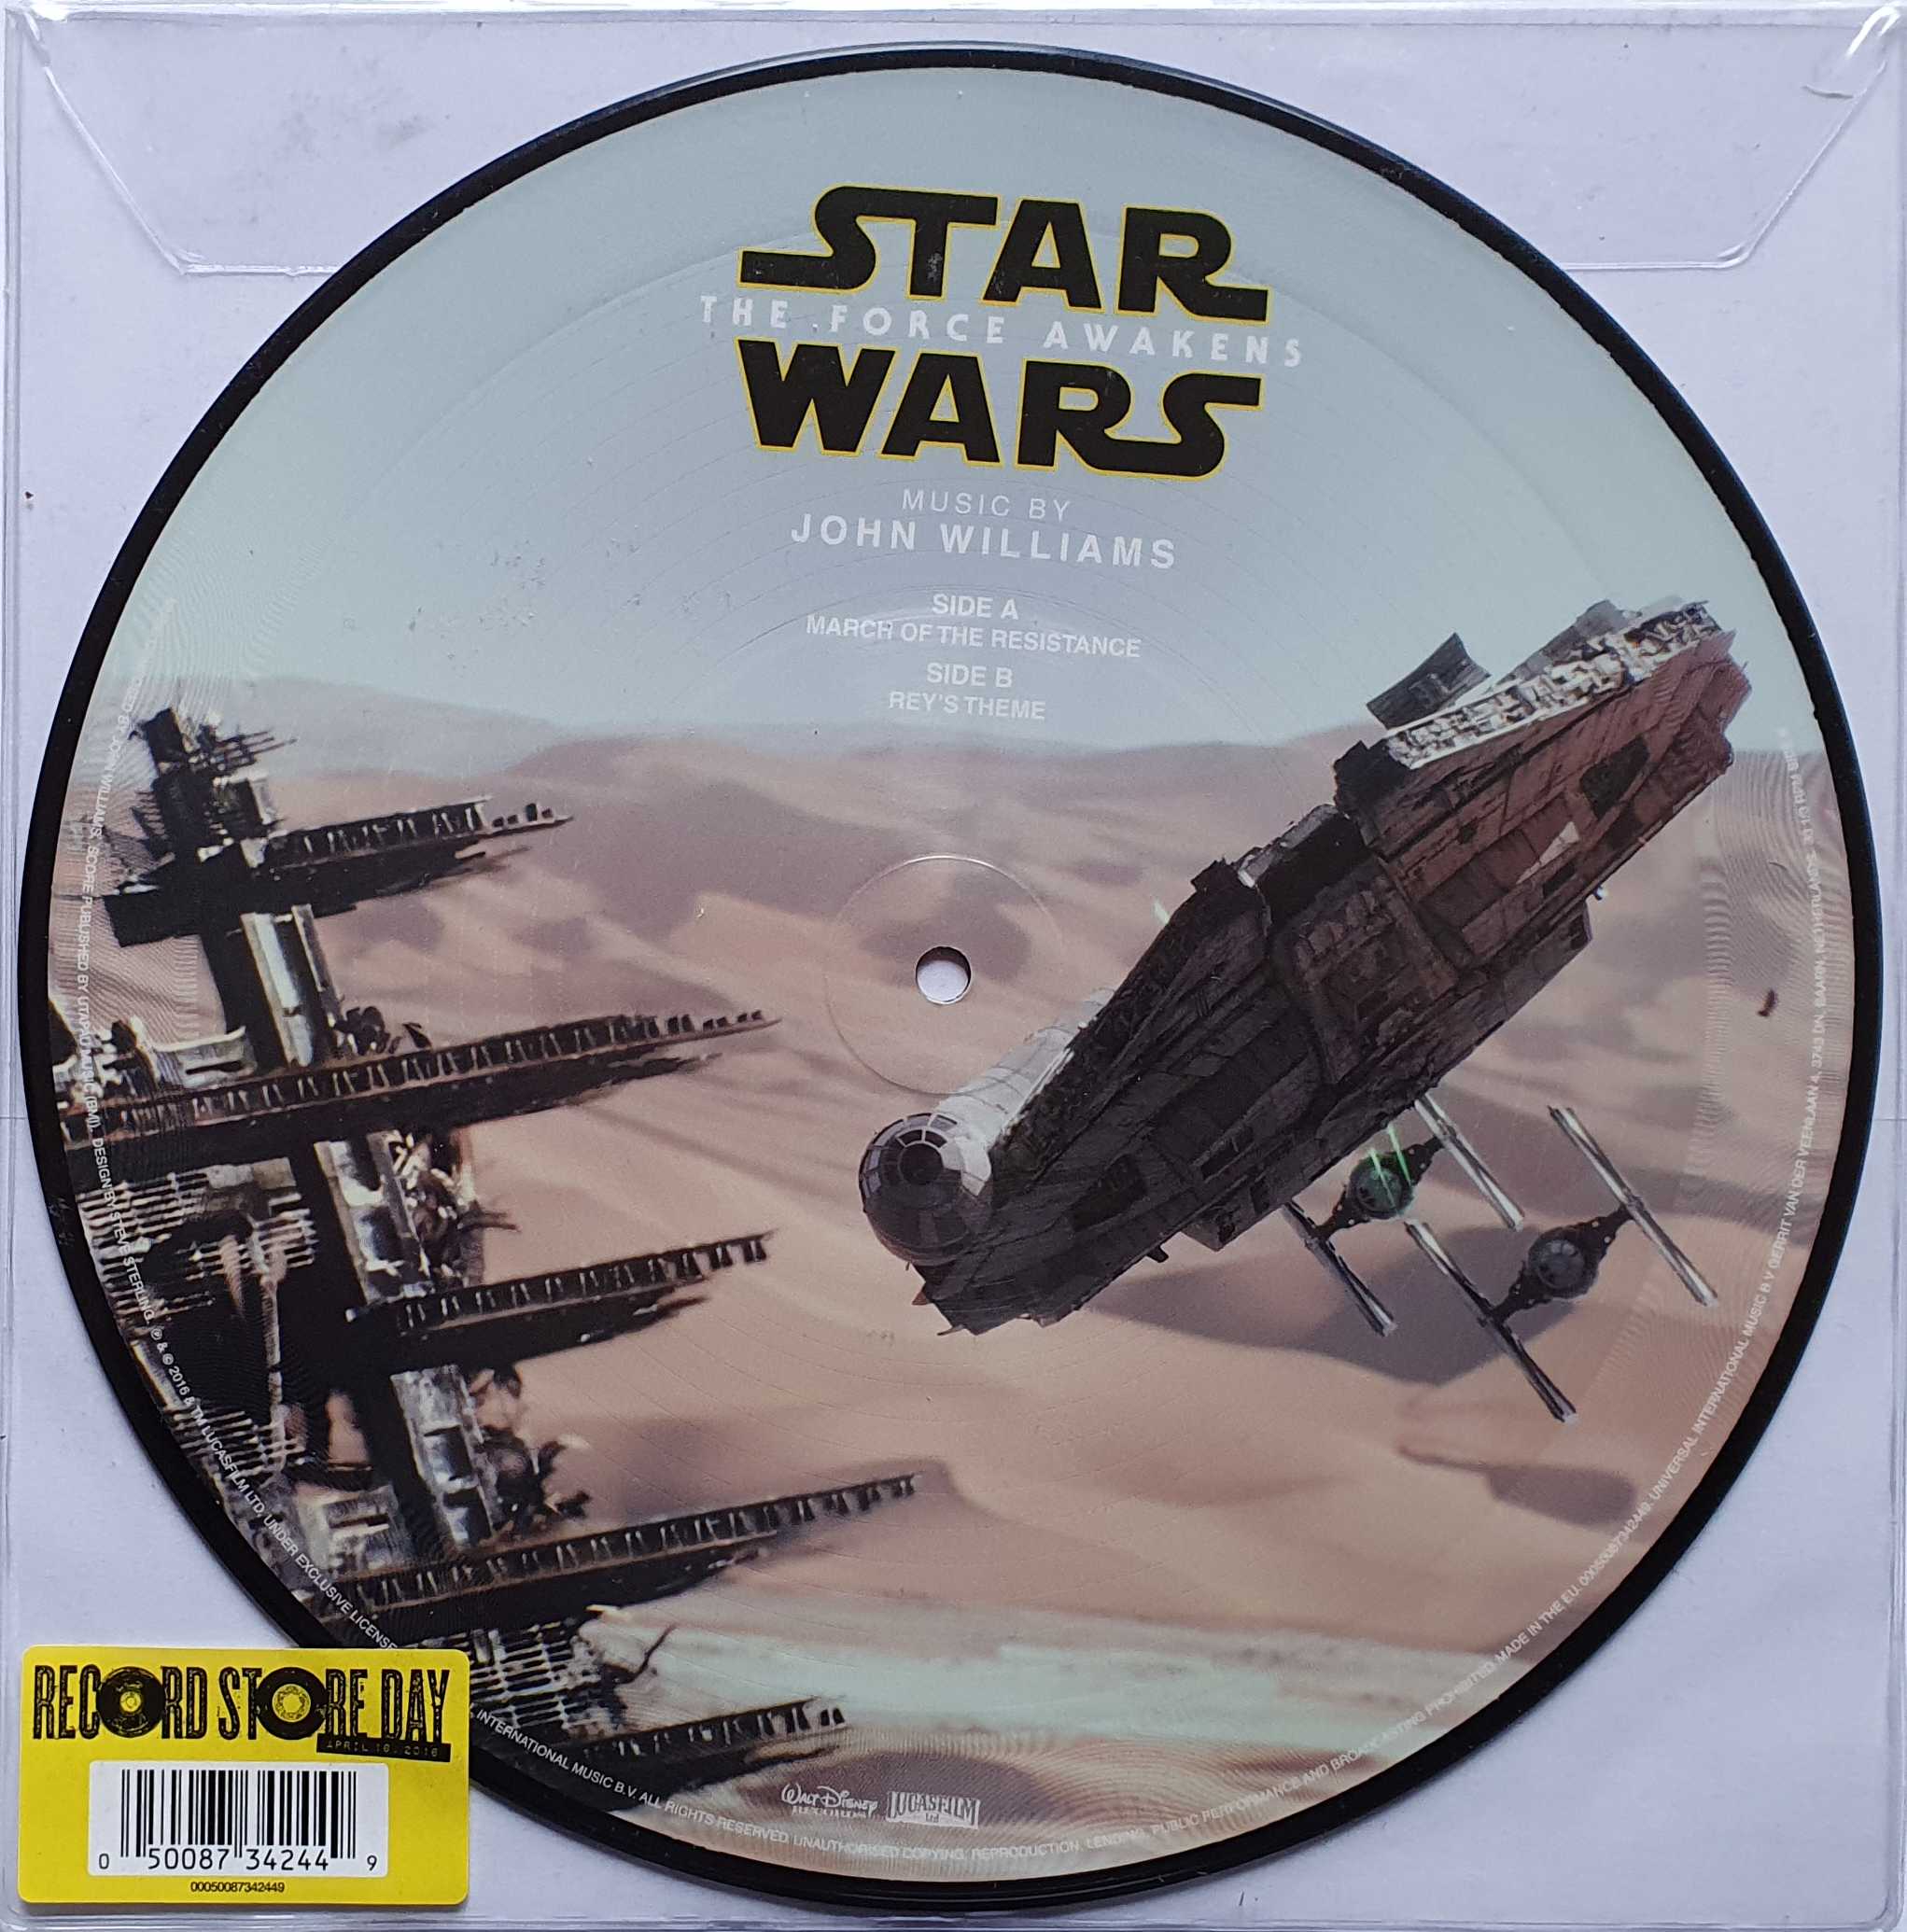 Picture of Star Wars: The Force Awakens -  Record Store Day 2016 by artist John Williams from ITV, Channel 4 and Channel 5 10inches library